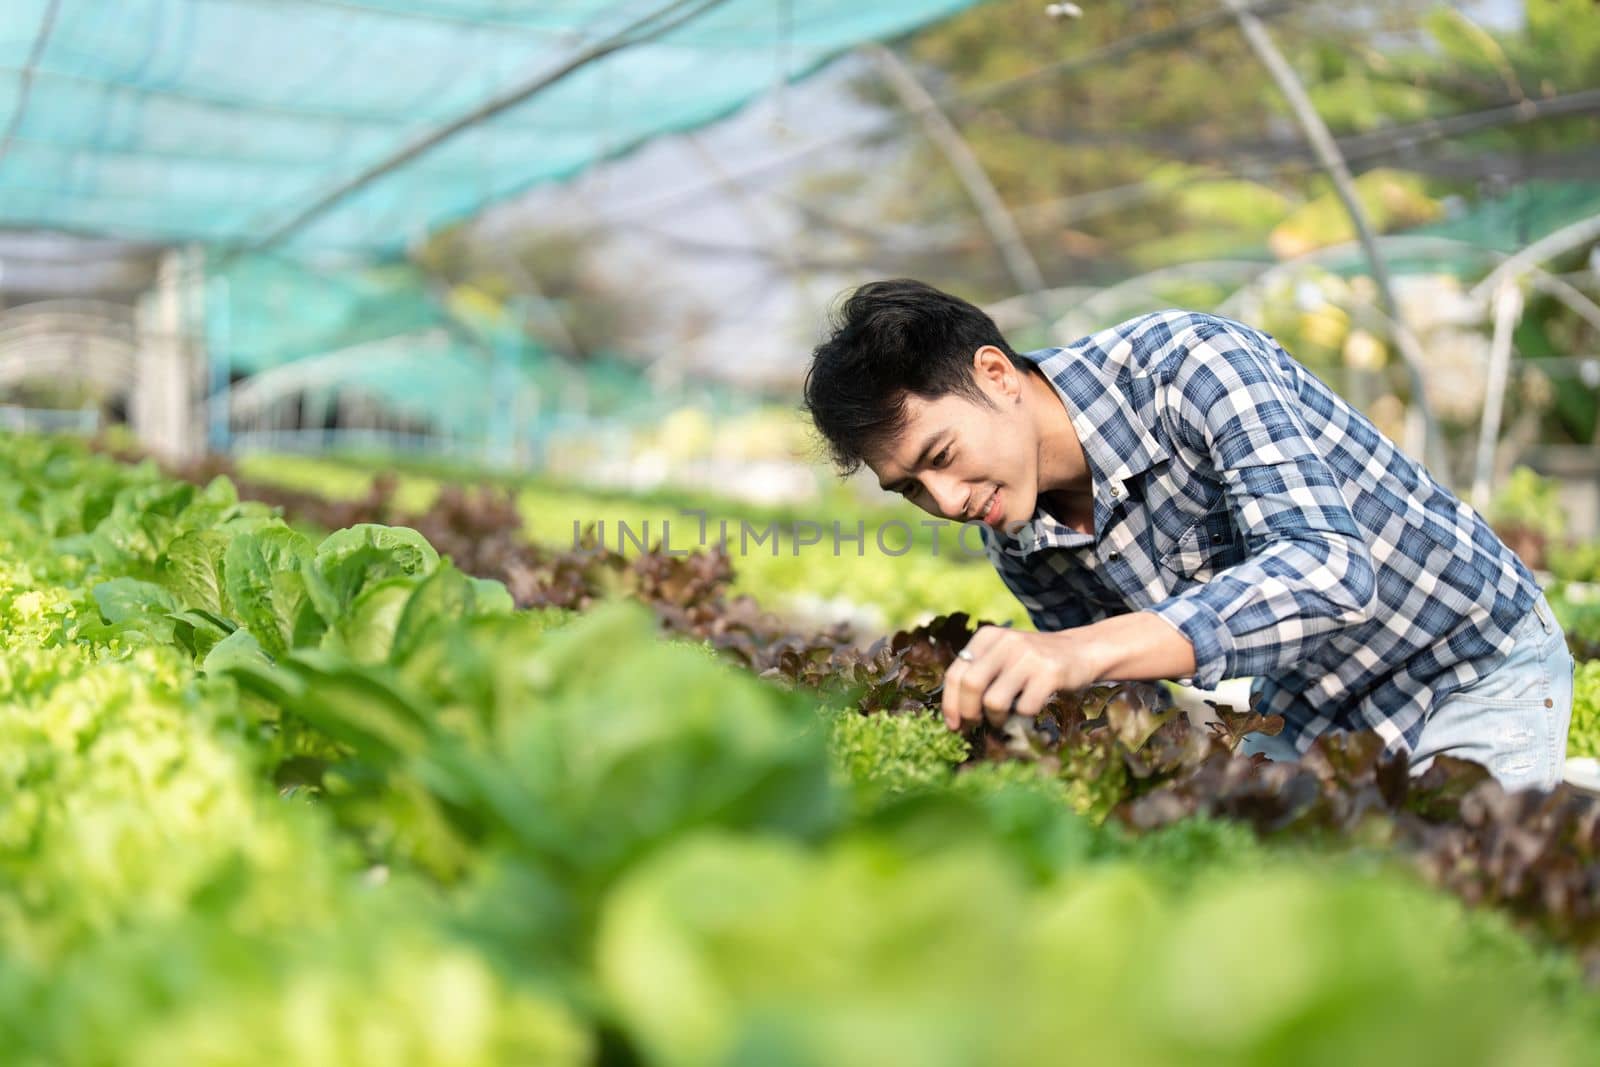 Happy male gardener smiling inspects quality of green oak vegetable in greenhouse garden. Young asian farmer cultivate healthy nutrition organic salad vegetables in hydroponic farming by nateemee